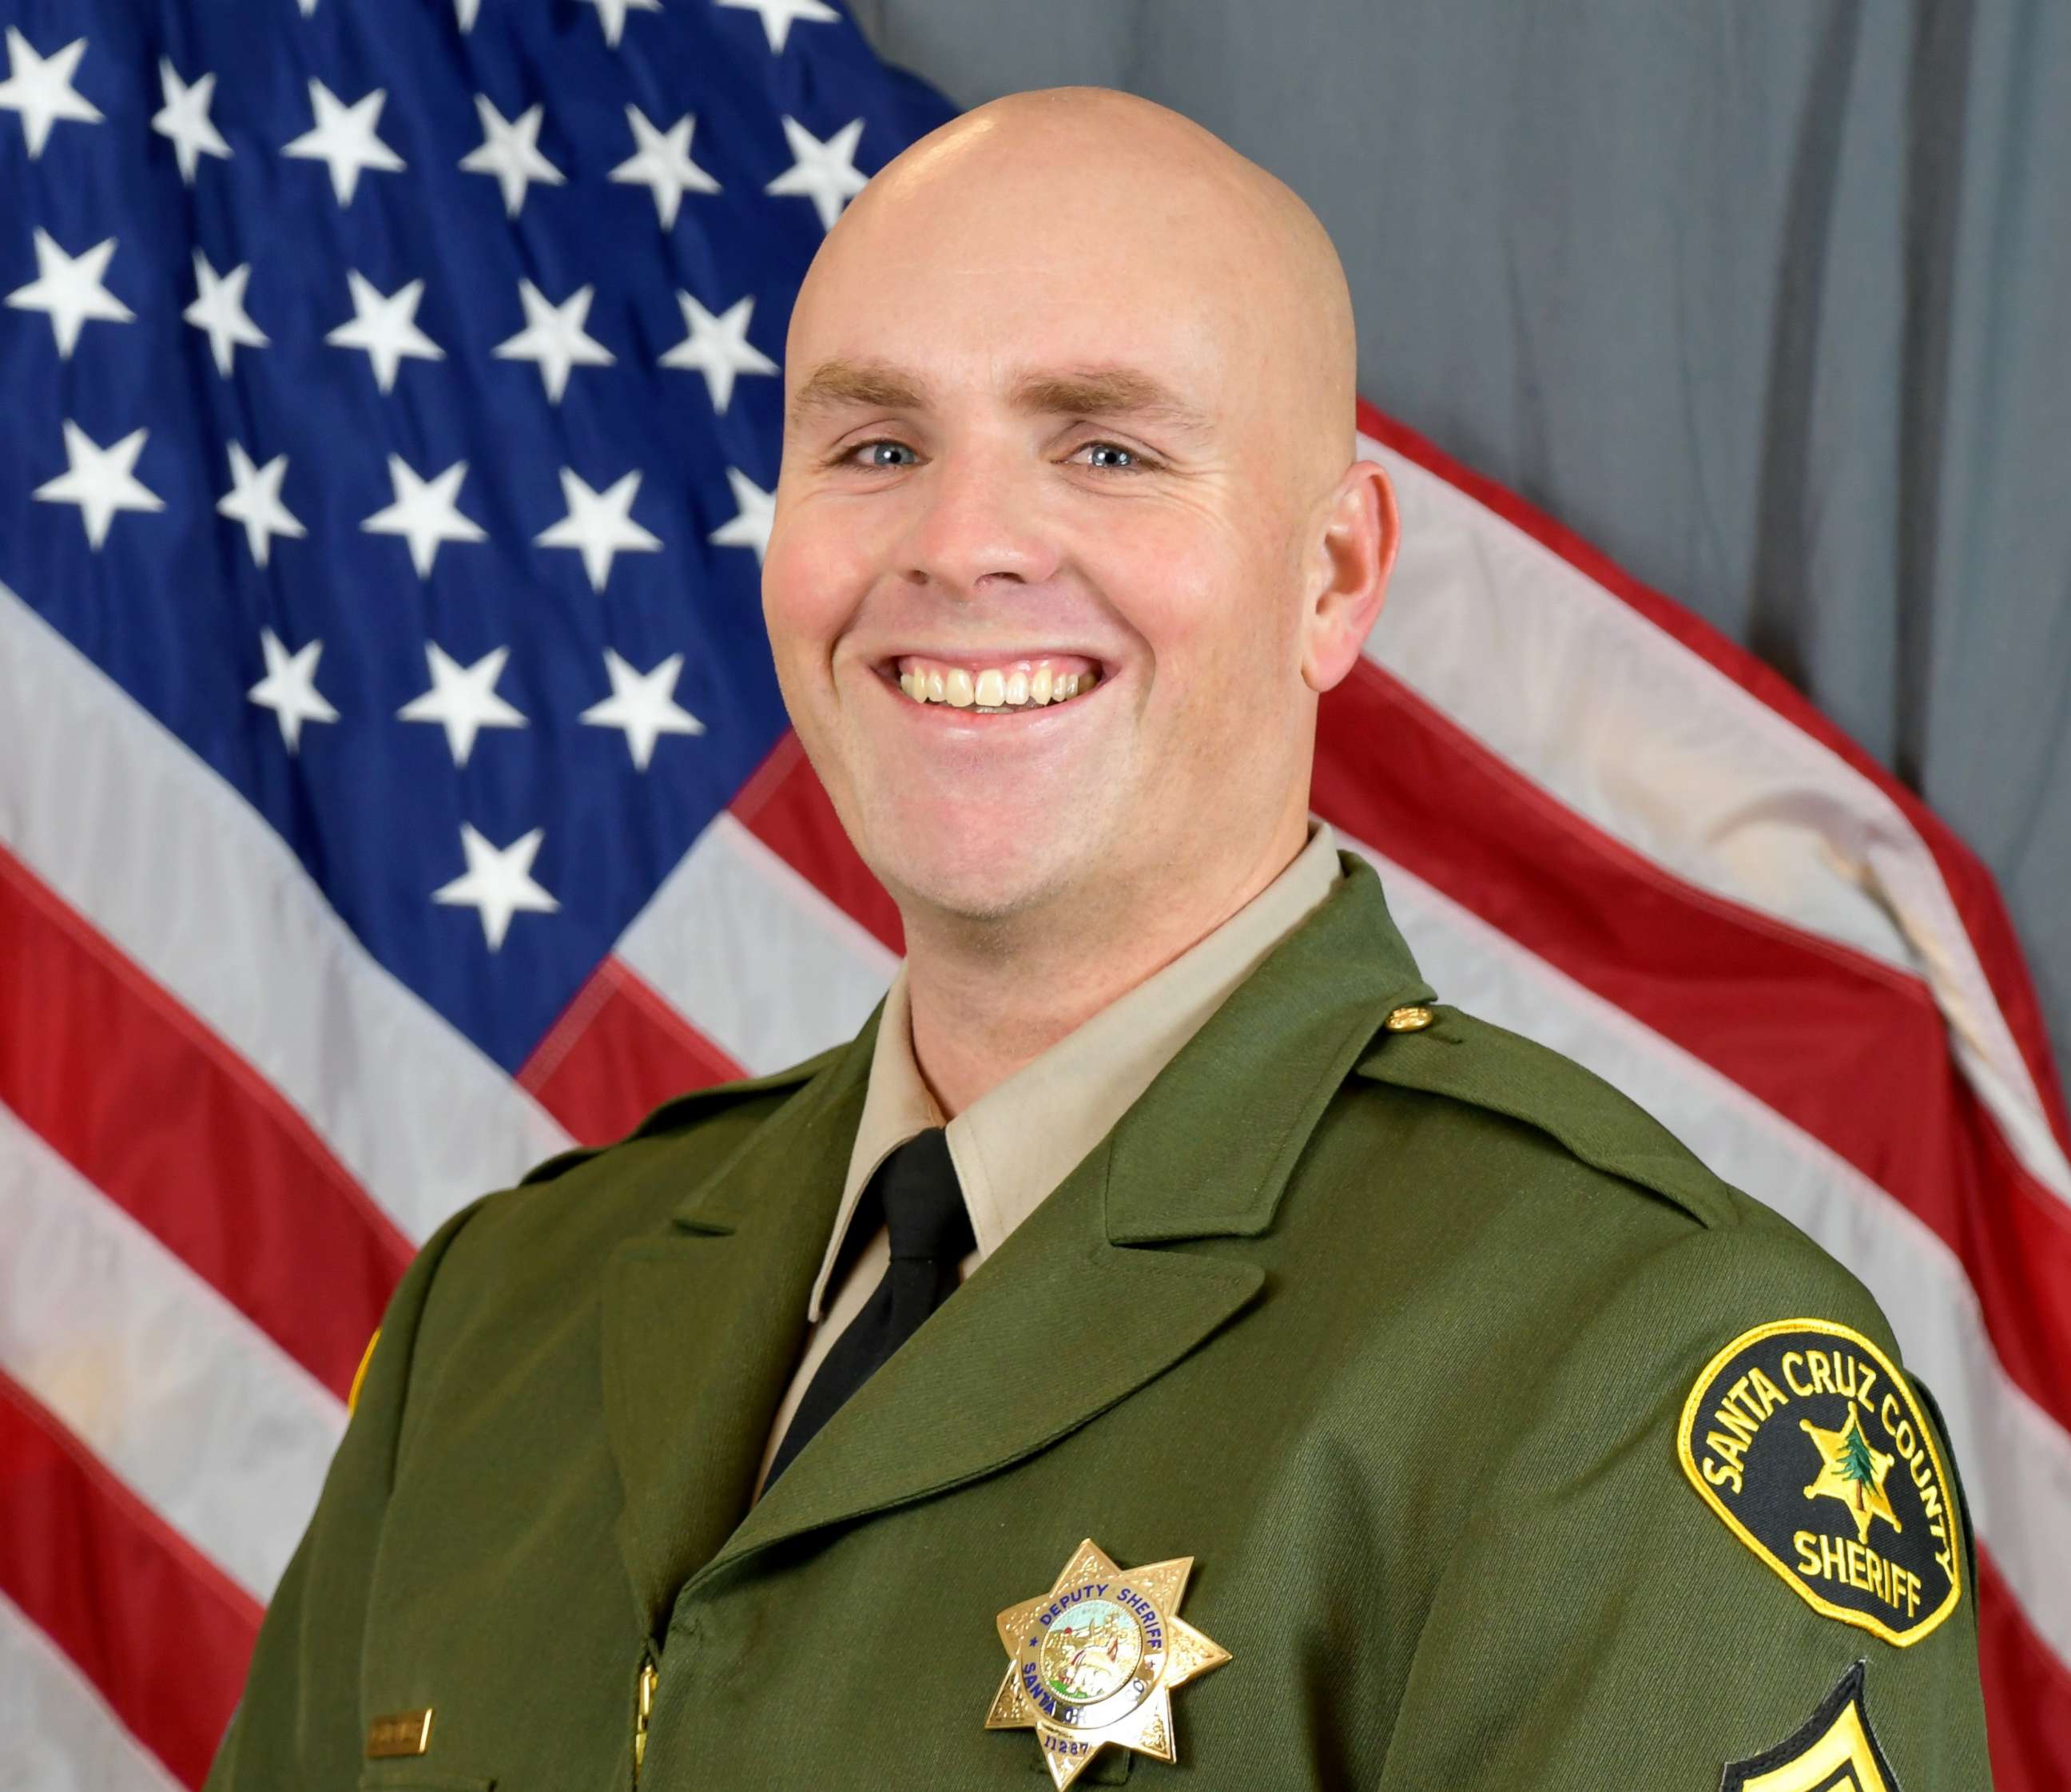 PHOTO: Sgt. Damon Gutzwiller, 38, was killed on June 6, 2020, in the Northern California town of Ben Lomond in what investigators suspect was an ambush that injured another officer.